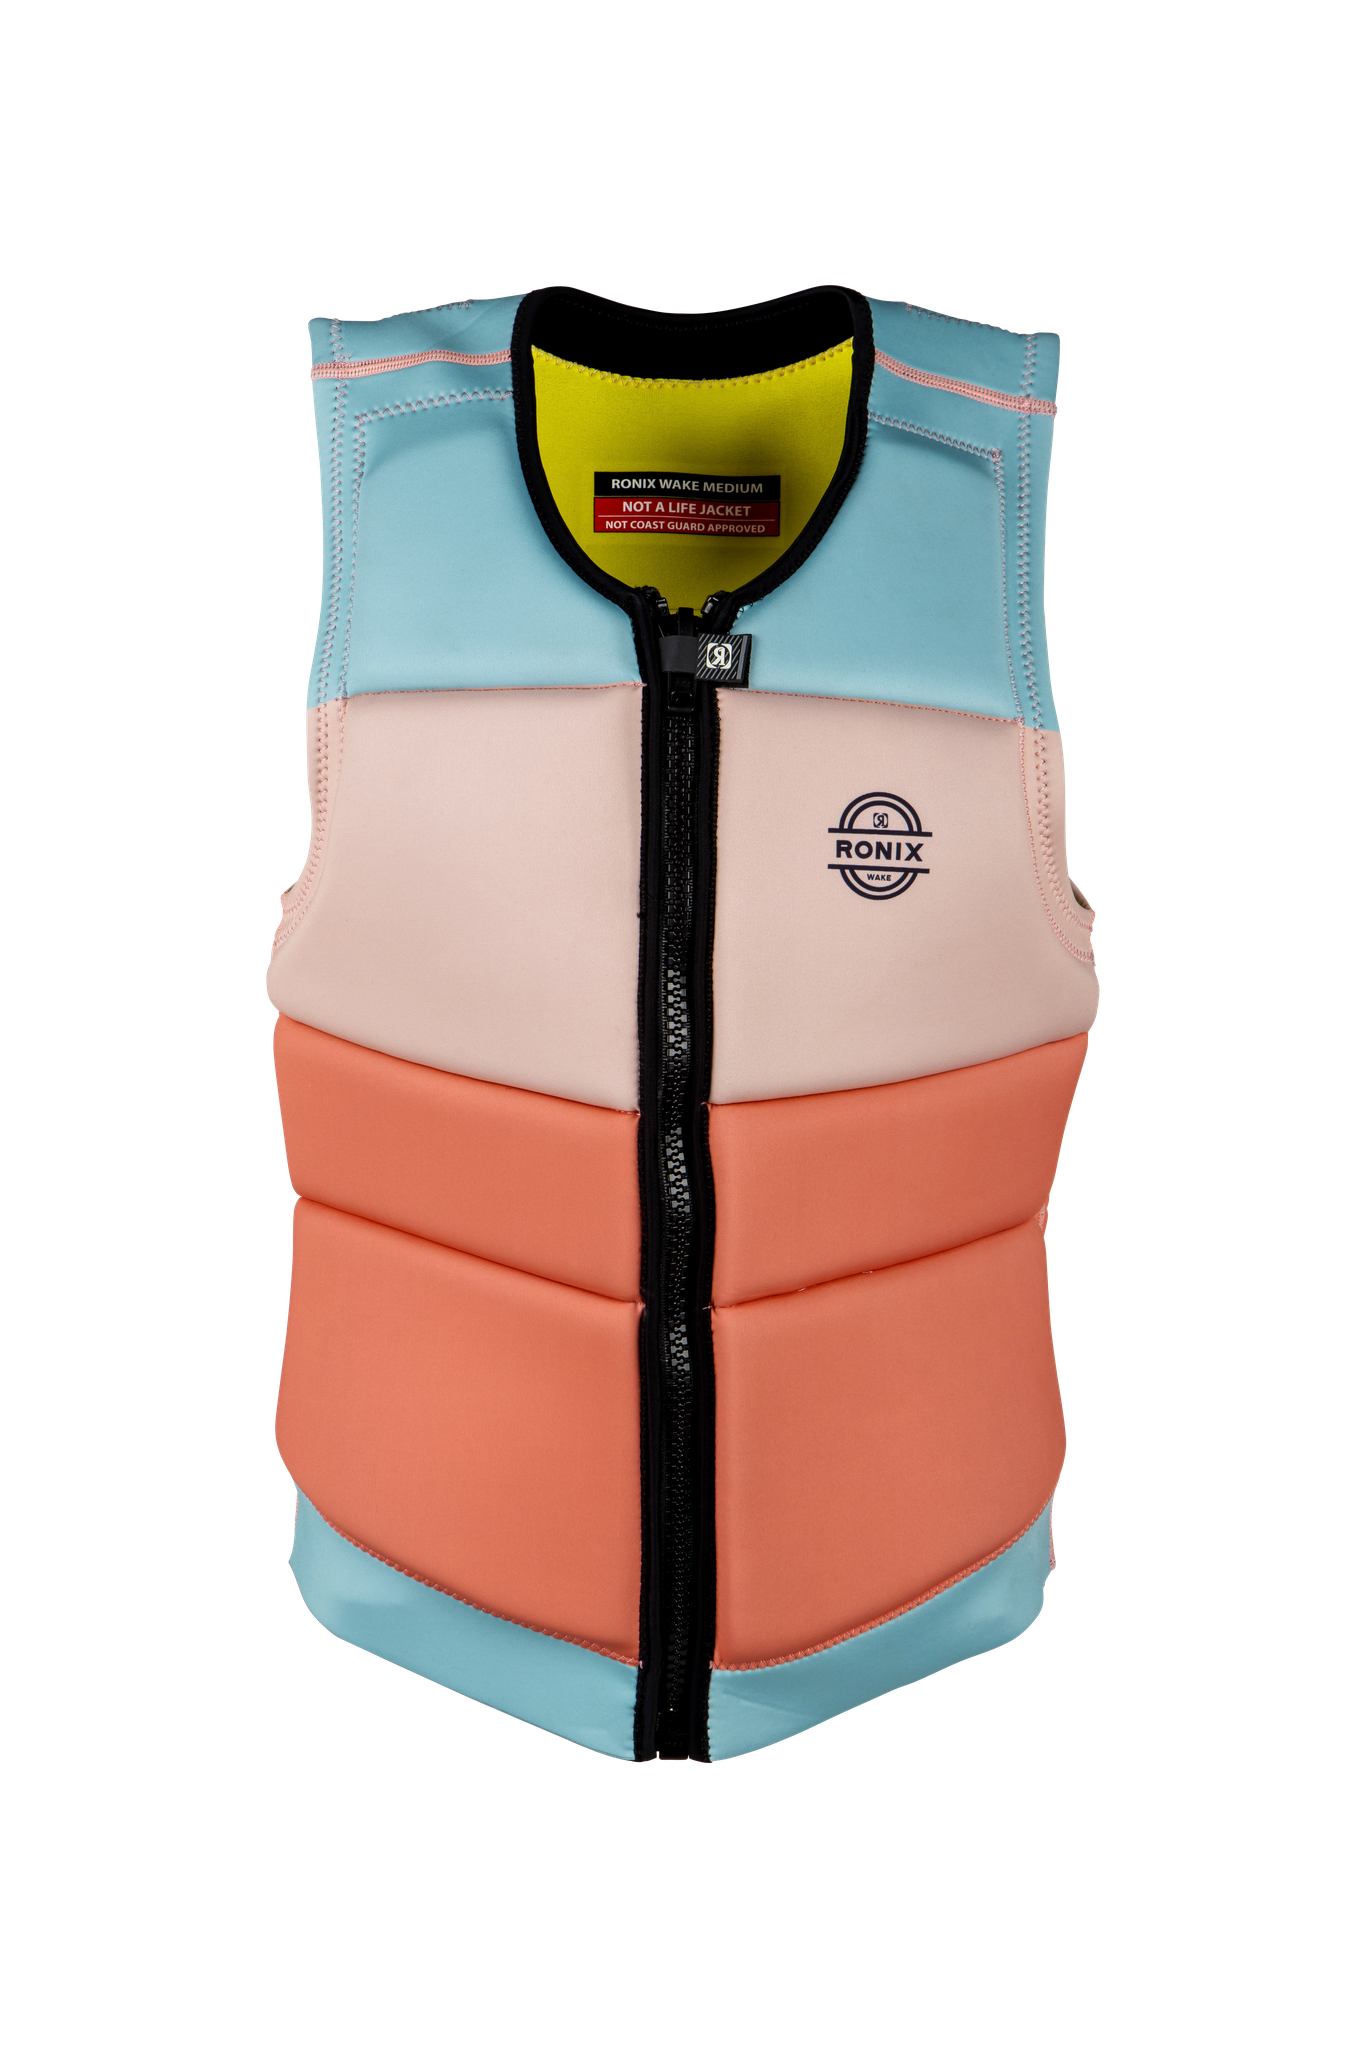 A Ronix 2023 Coral Women's CE Impact Vest with a pink, orange, and blue color.